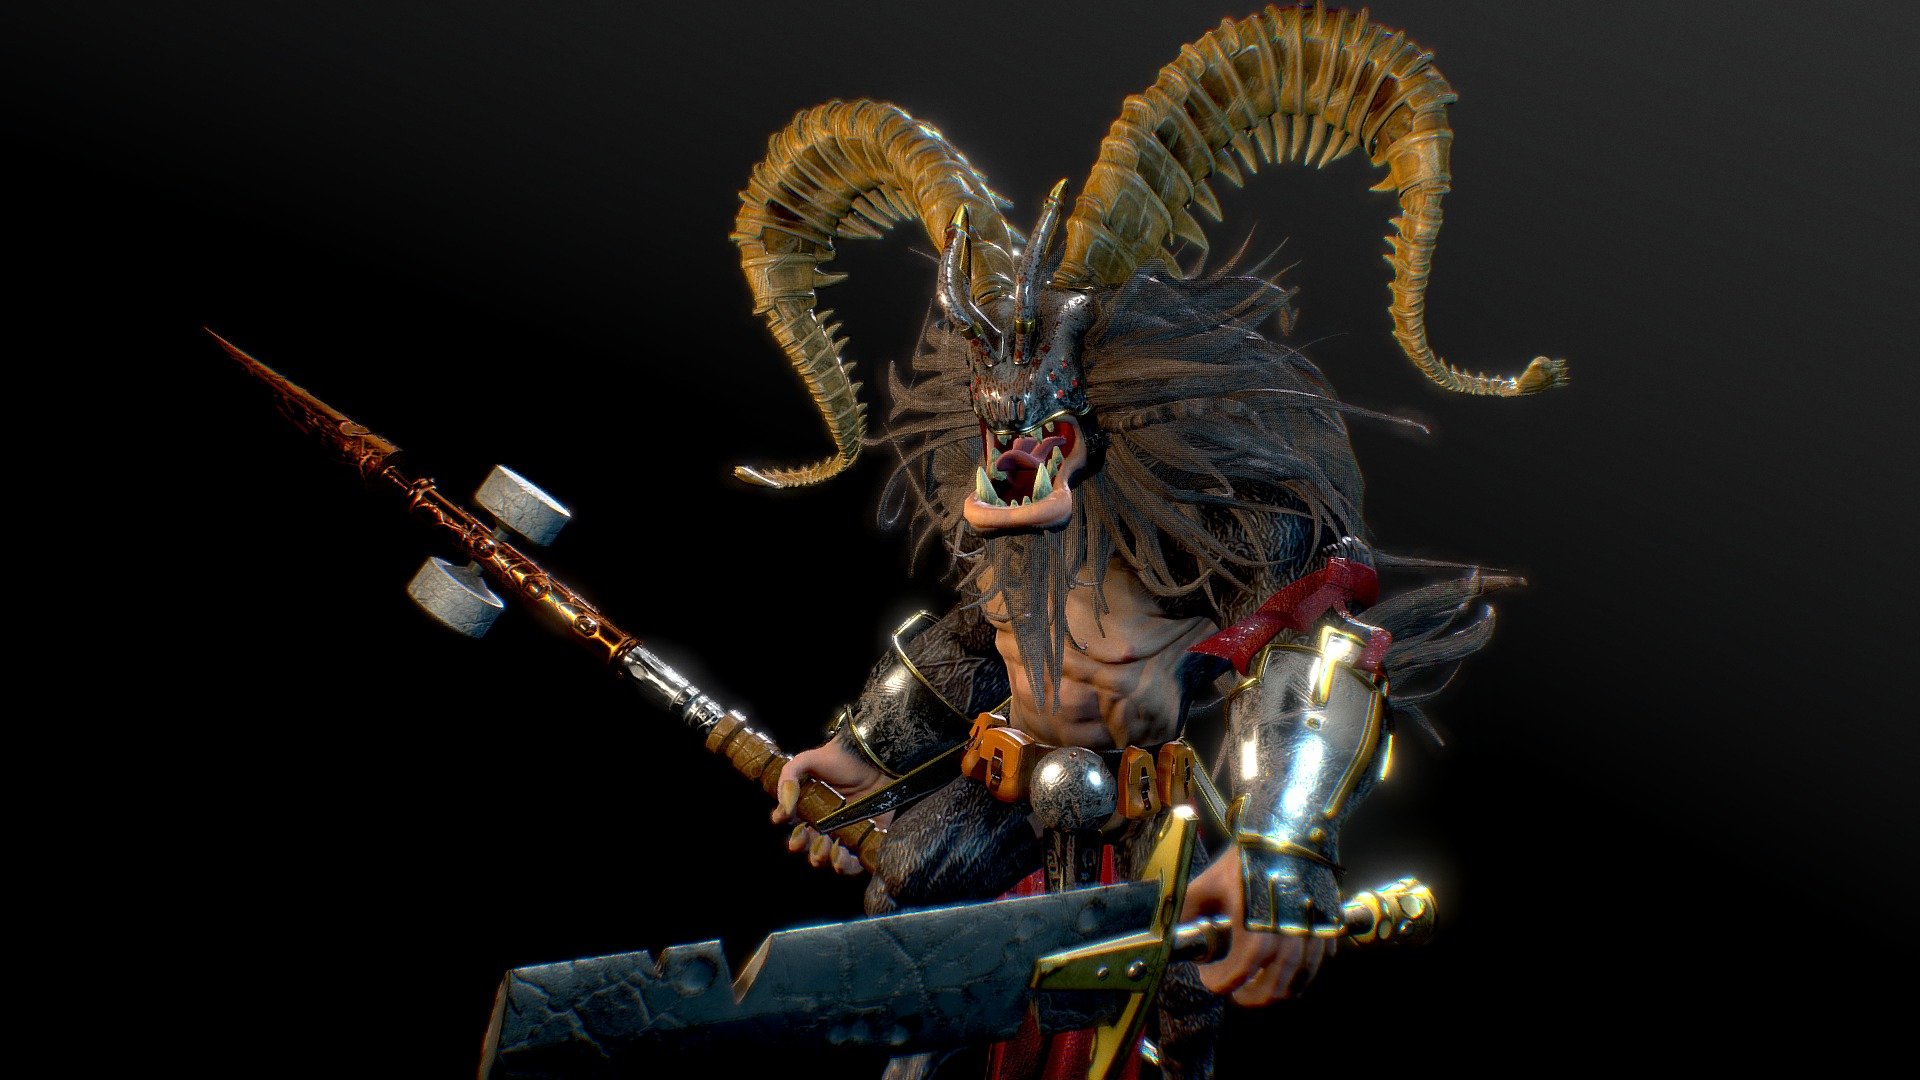 This project is roughly 4 weeks in the making and is by far the most fun I've been with modeling a character. I modeled this in Zbrush and modeled the props and weapons in Maya. Hair was a bit of a challenge but I was inclined to keep it simple. I textured Ram Warrior in Substance Painter and posed him in Zbrush using ZSpheres. My original renders are from Marmoset 3d model